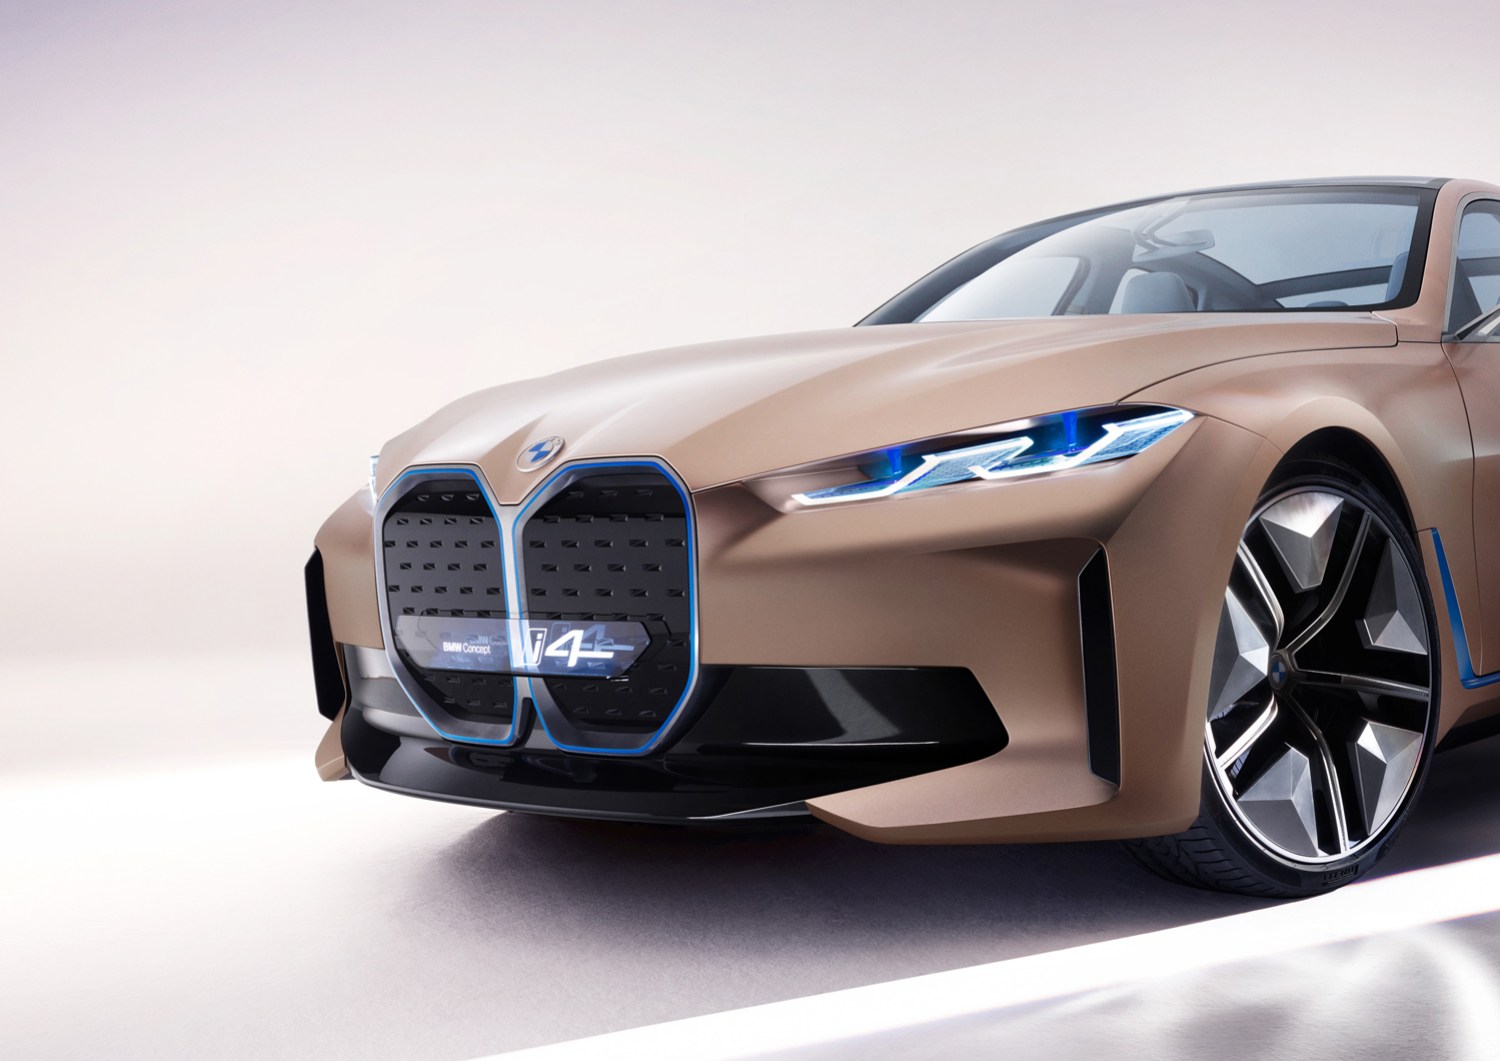 2020 BMW Concept i4 Previews 3 Series-Sized Electric Car